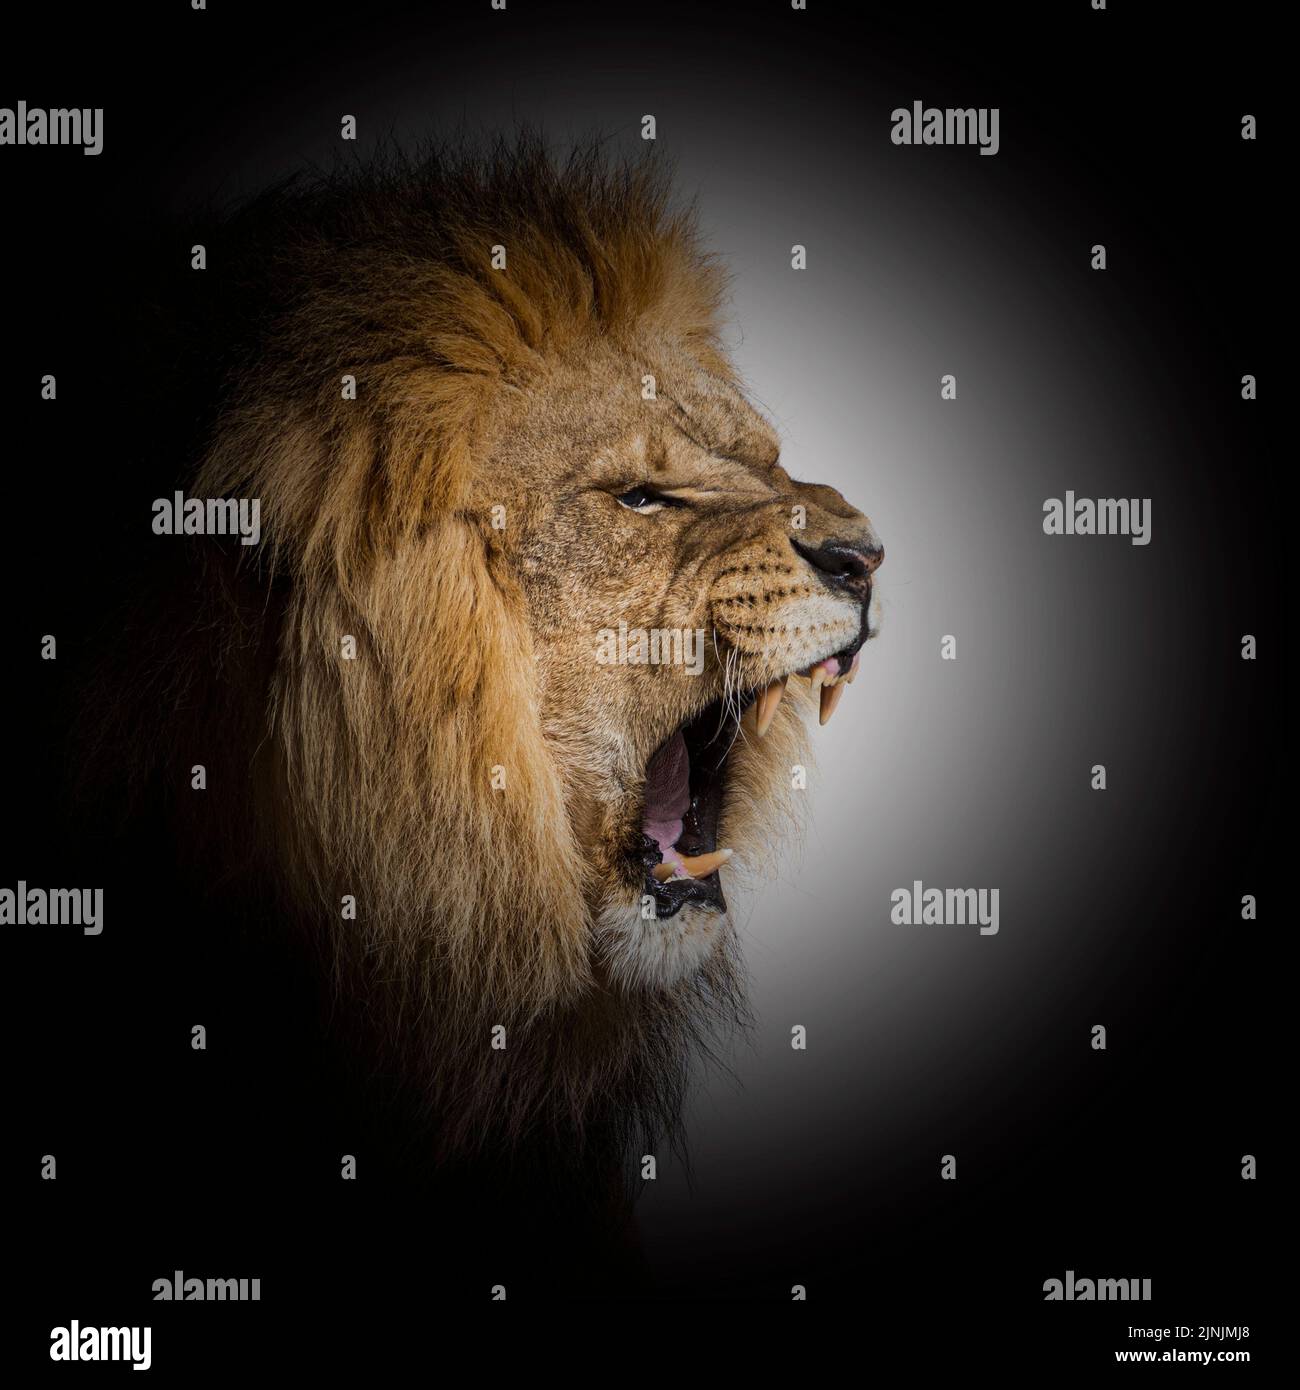 Male adult lion roaring and showing his canines aggressively, inside a black circle Stock Photo